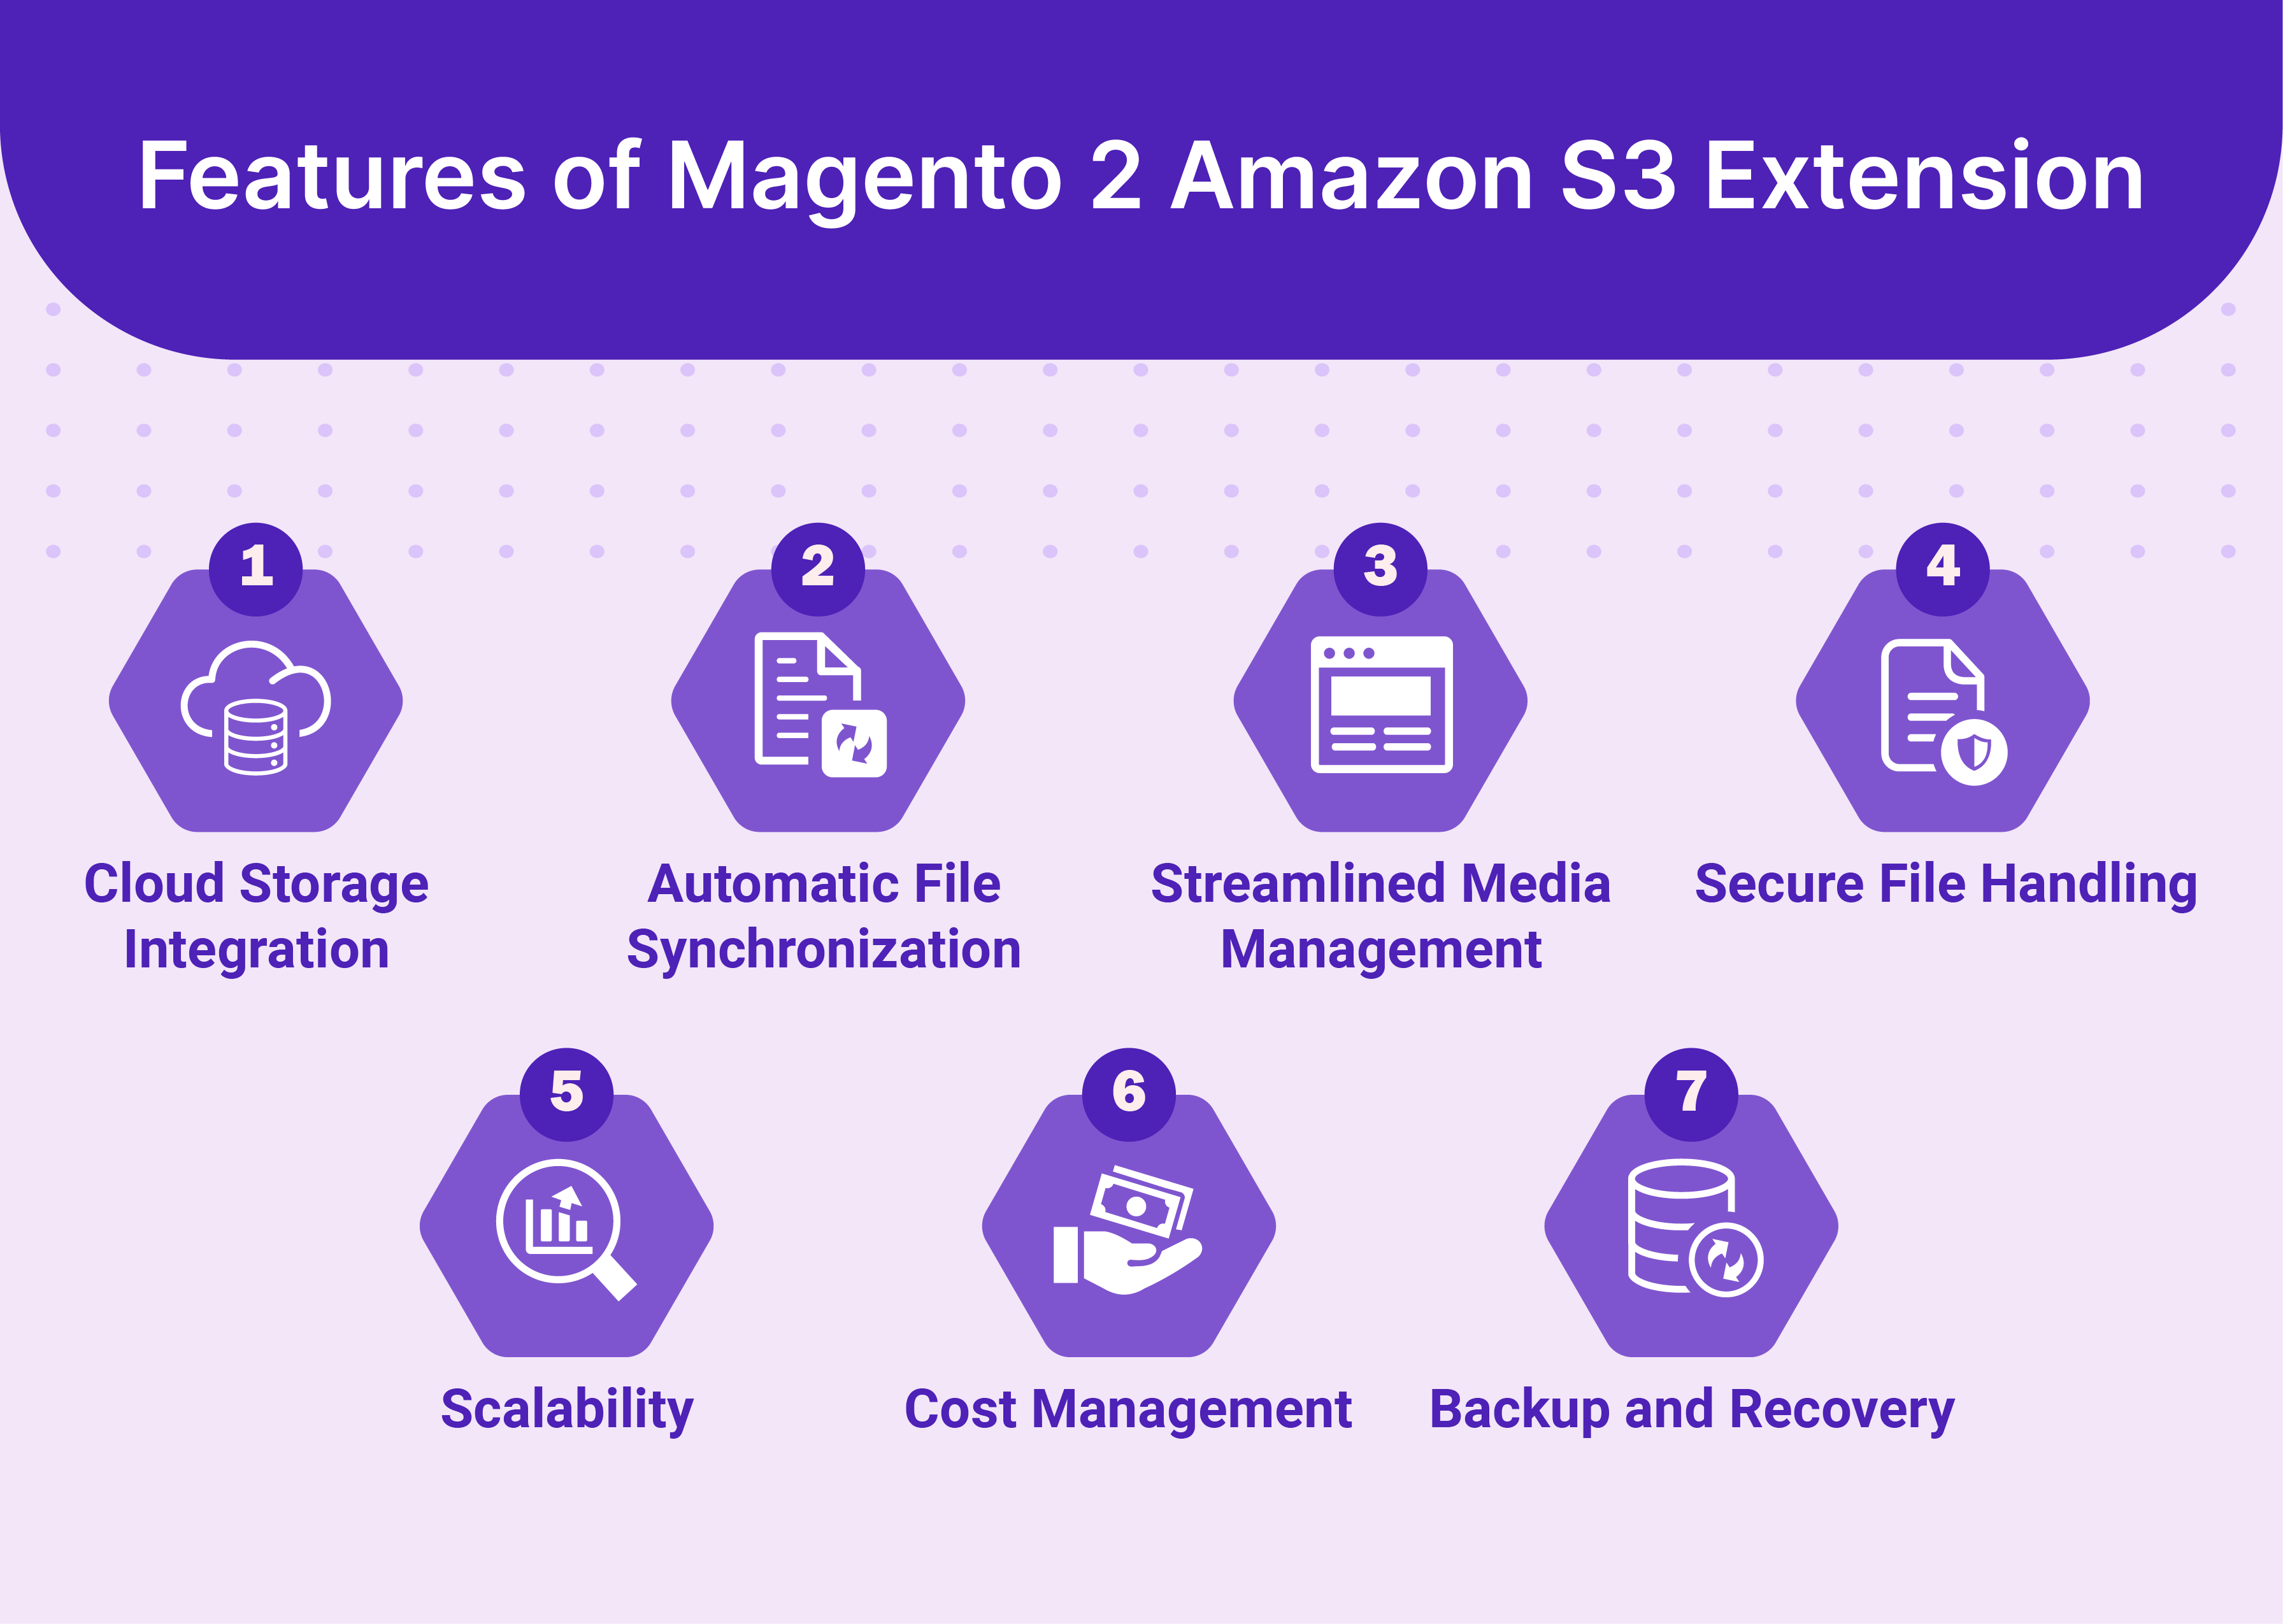 Features of Magento 2 Amazon S3 Extension